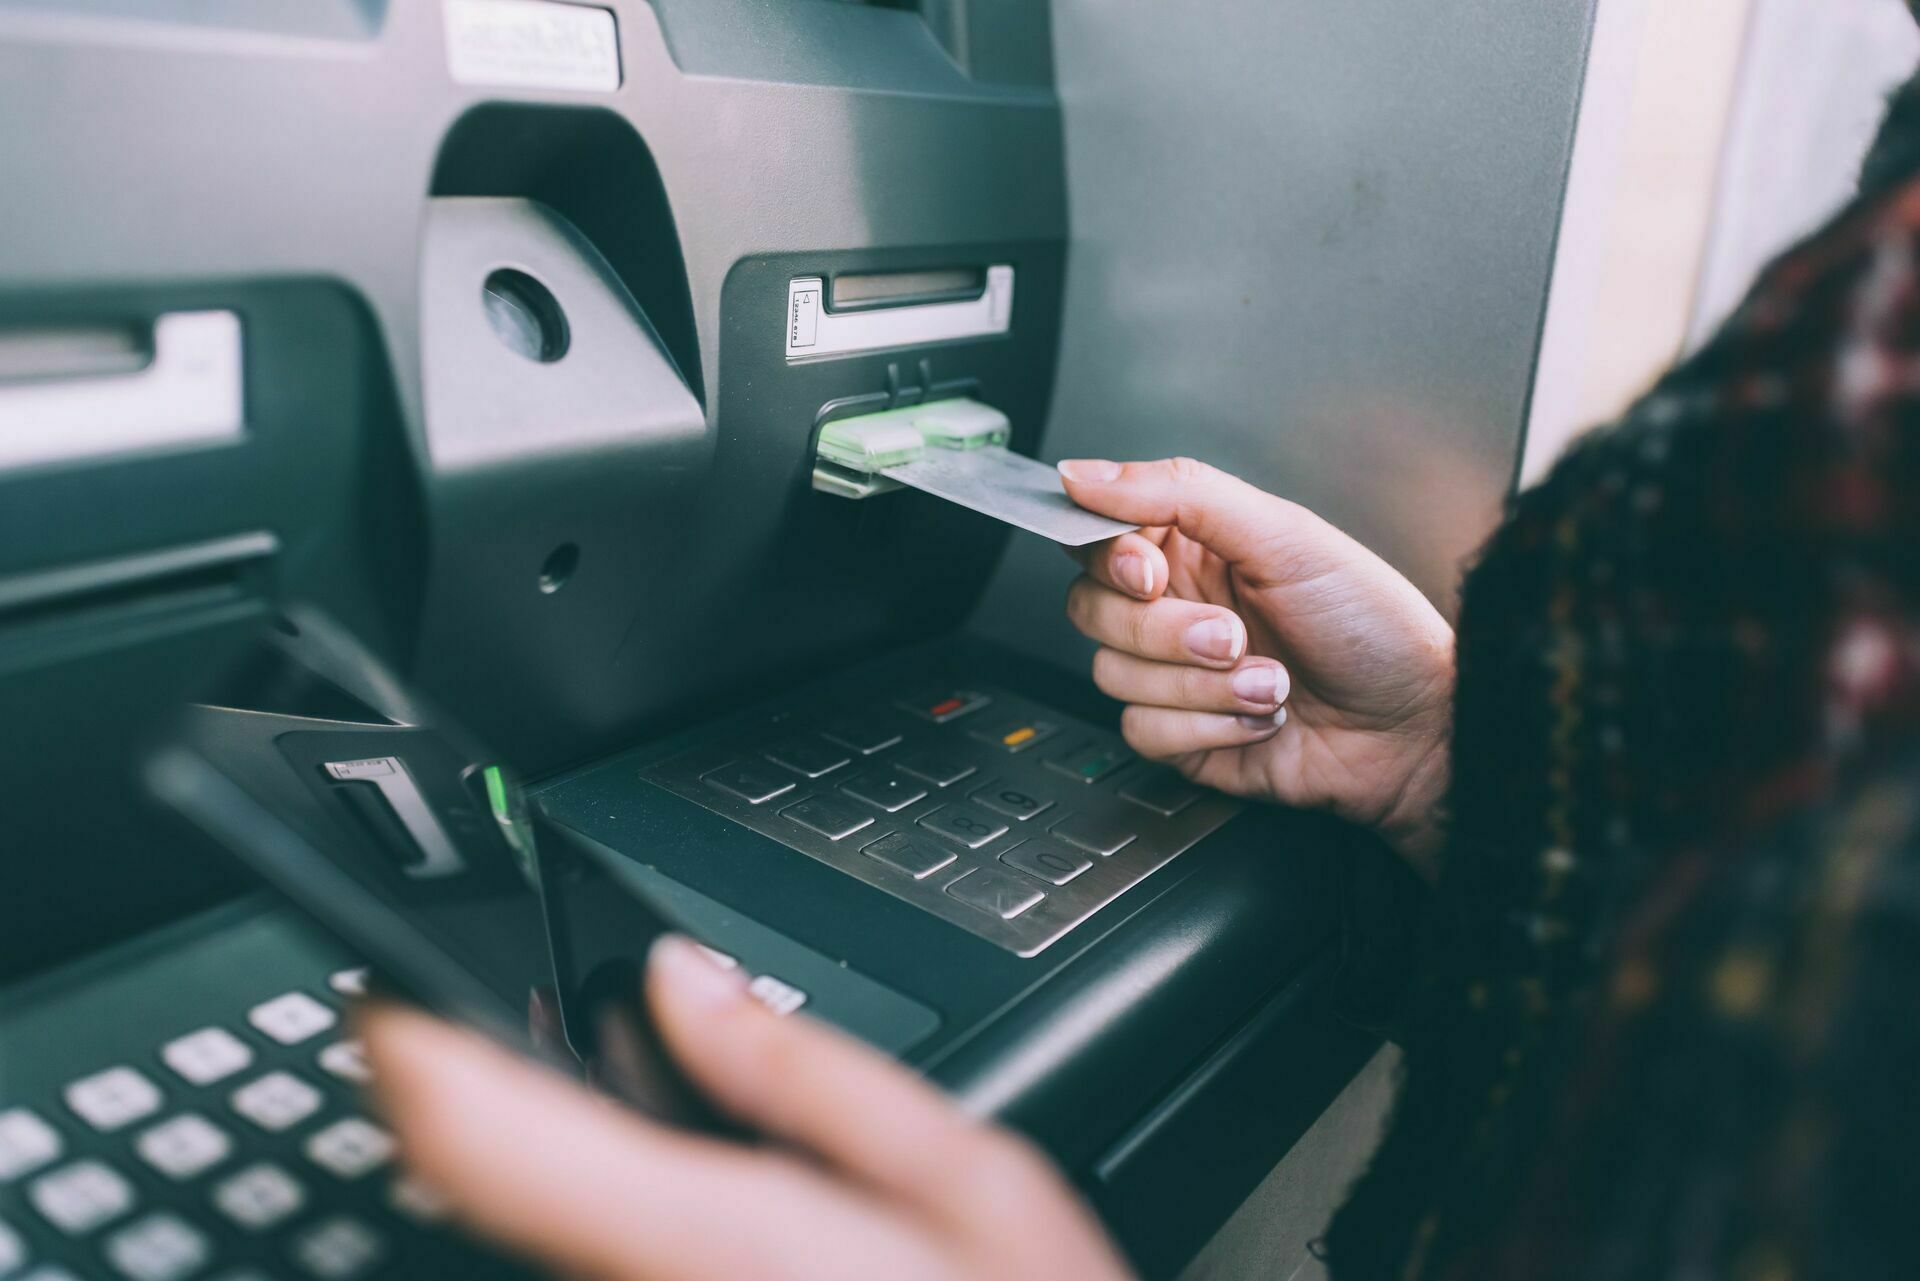 Cash withdrawals turned out to be the most unpopular transaction with bank cards